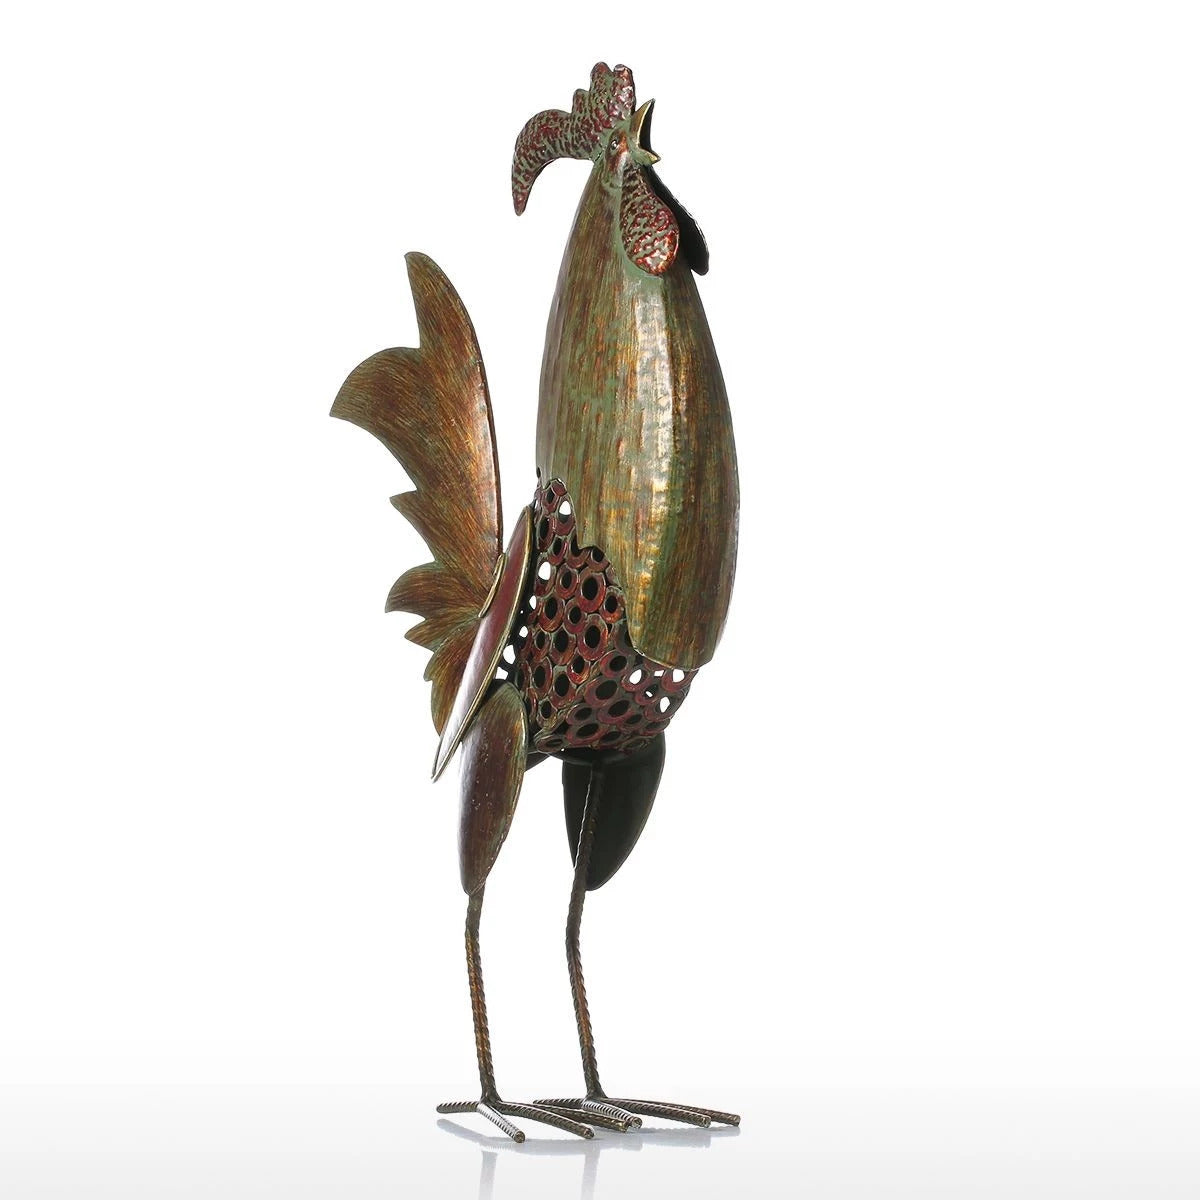 Metal Rooster Statues For Kitchen Decor & Gifts inspired by Christmas